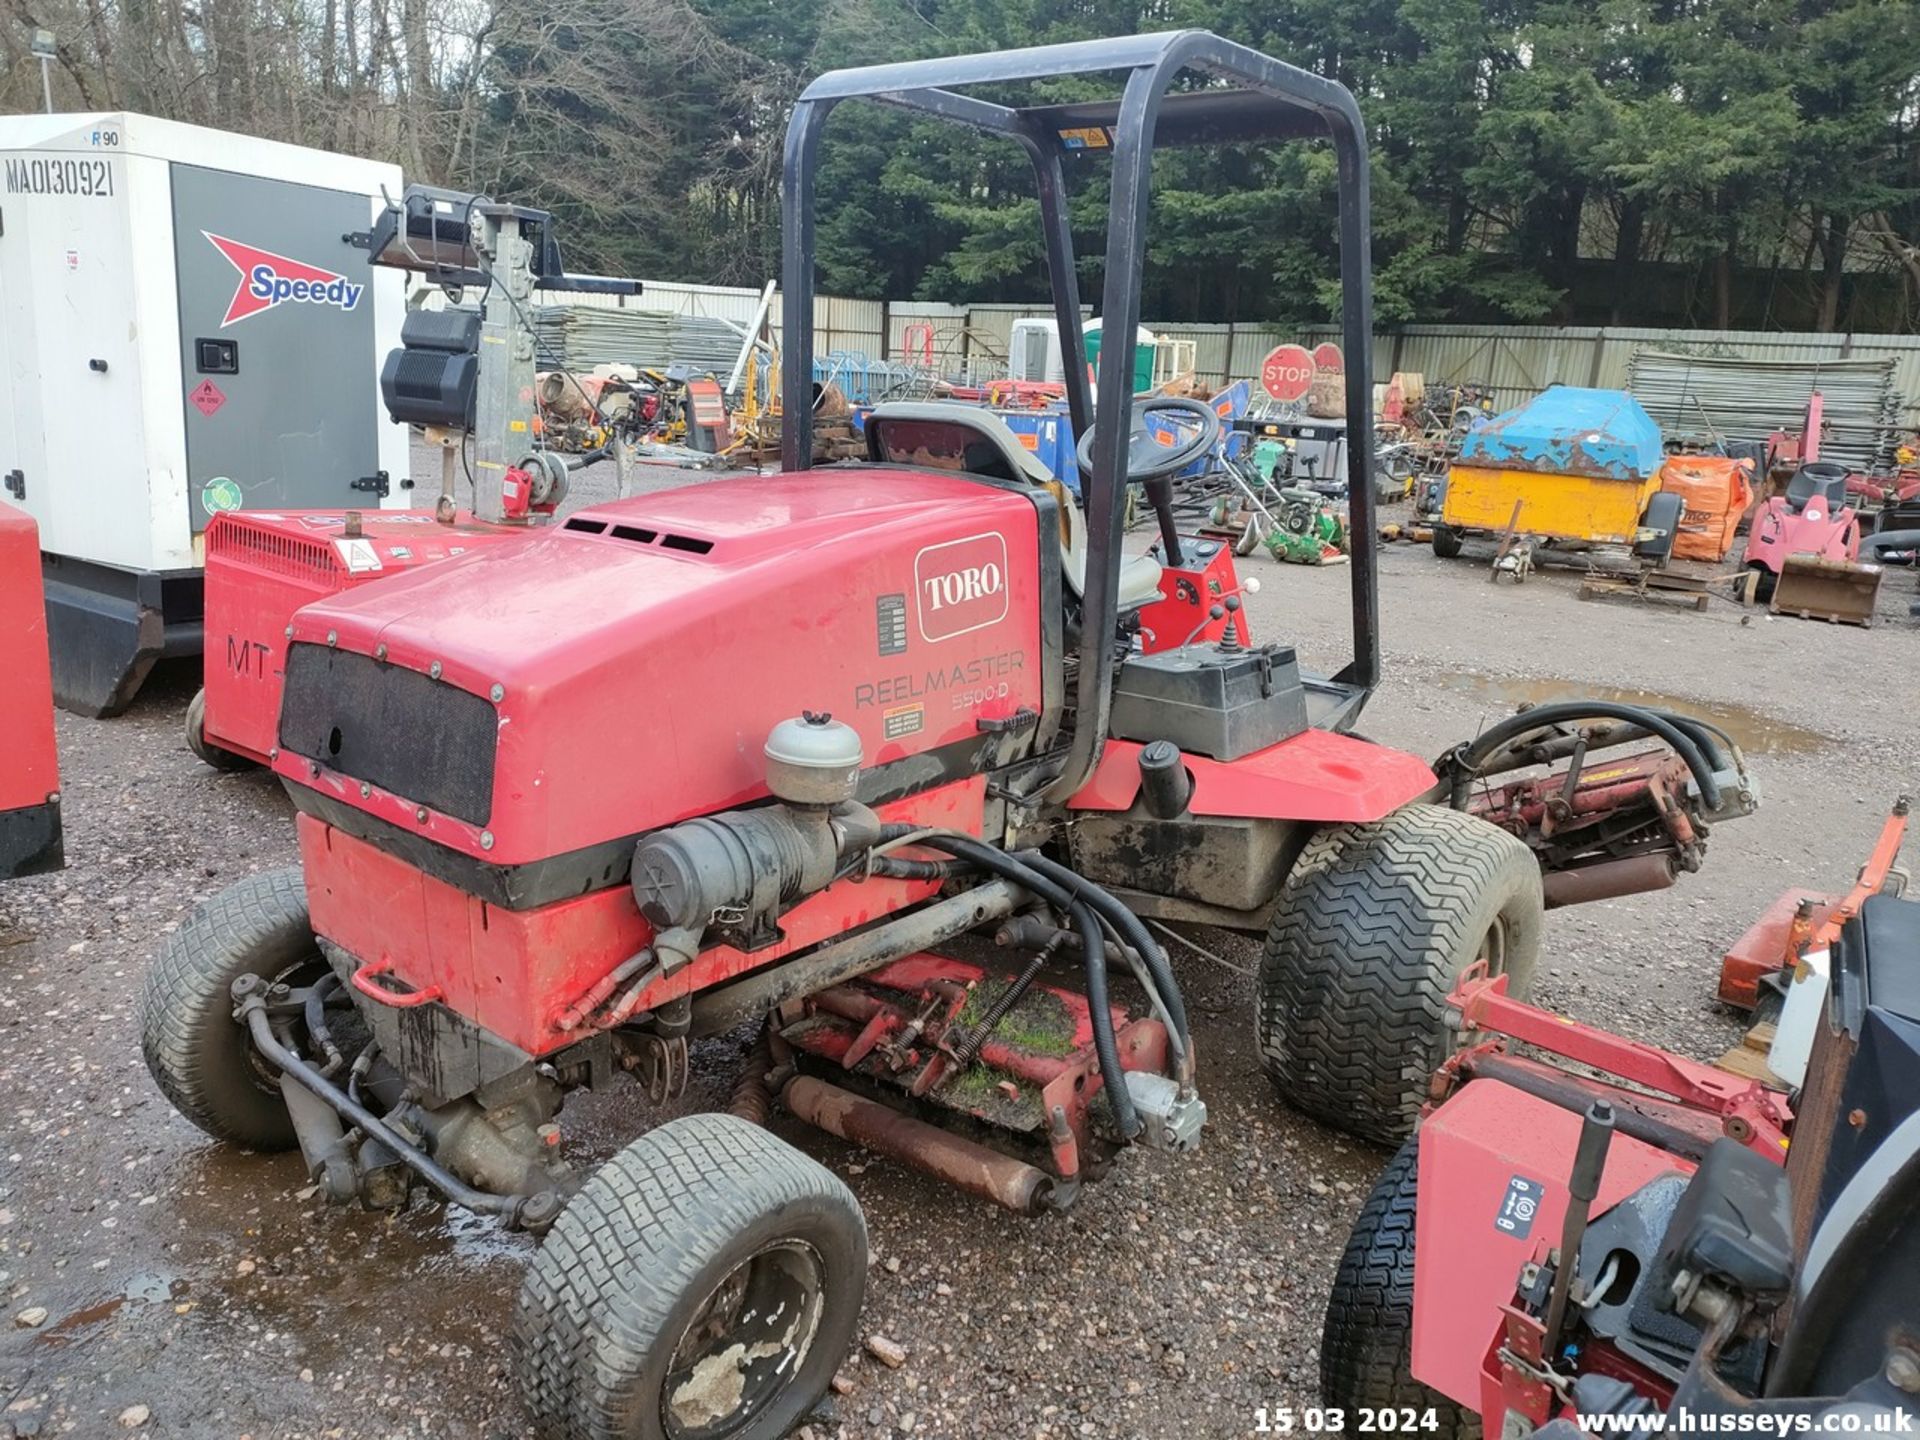 TORO REELMASTER 5500D 5 GANG MOWER (NO KEY BUT WAS DRIVEN INTO PLACE) - Image 5 of 8